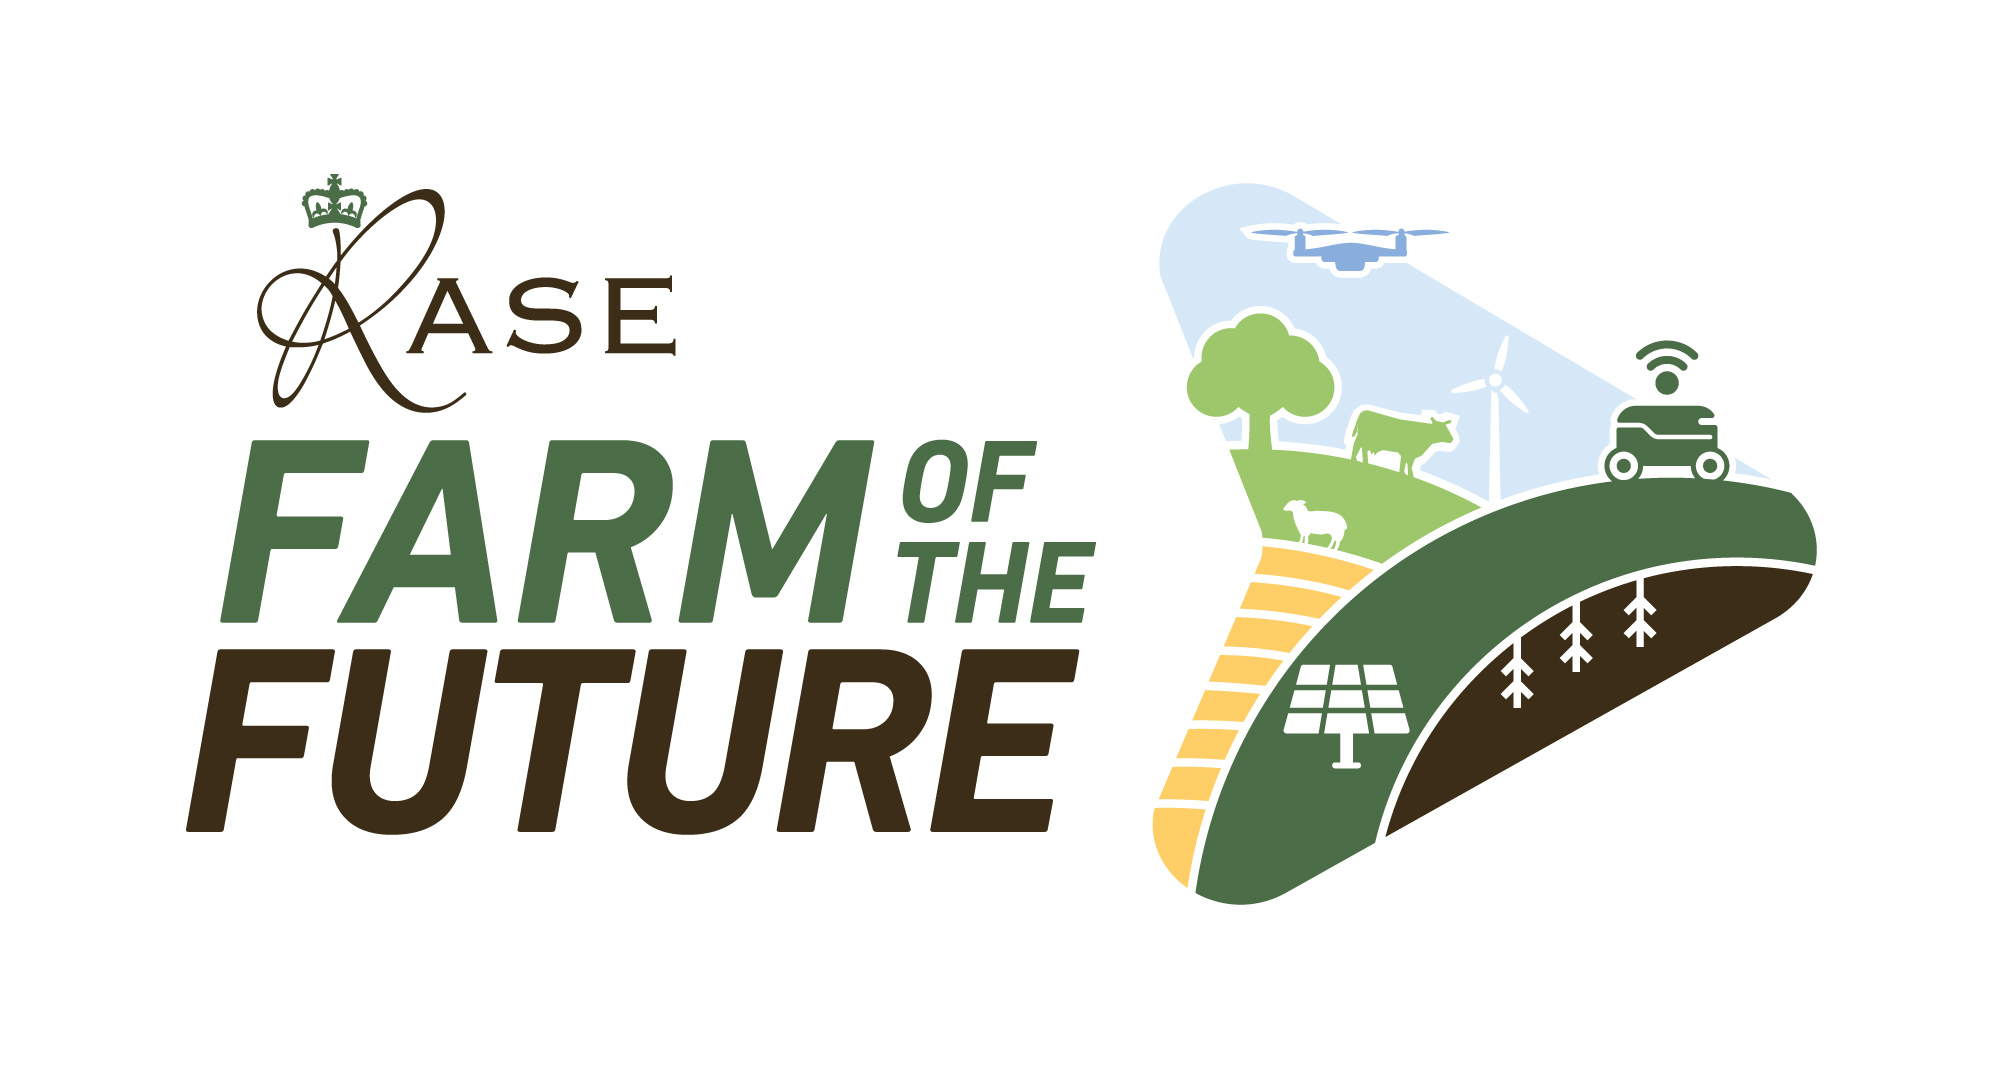 Carbon calculators compared: A snapshot from the Farm of the Future webinar  